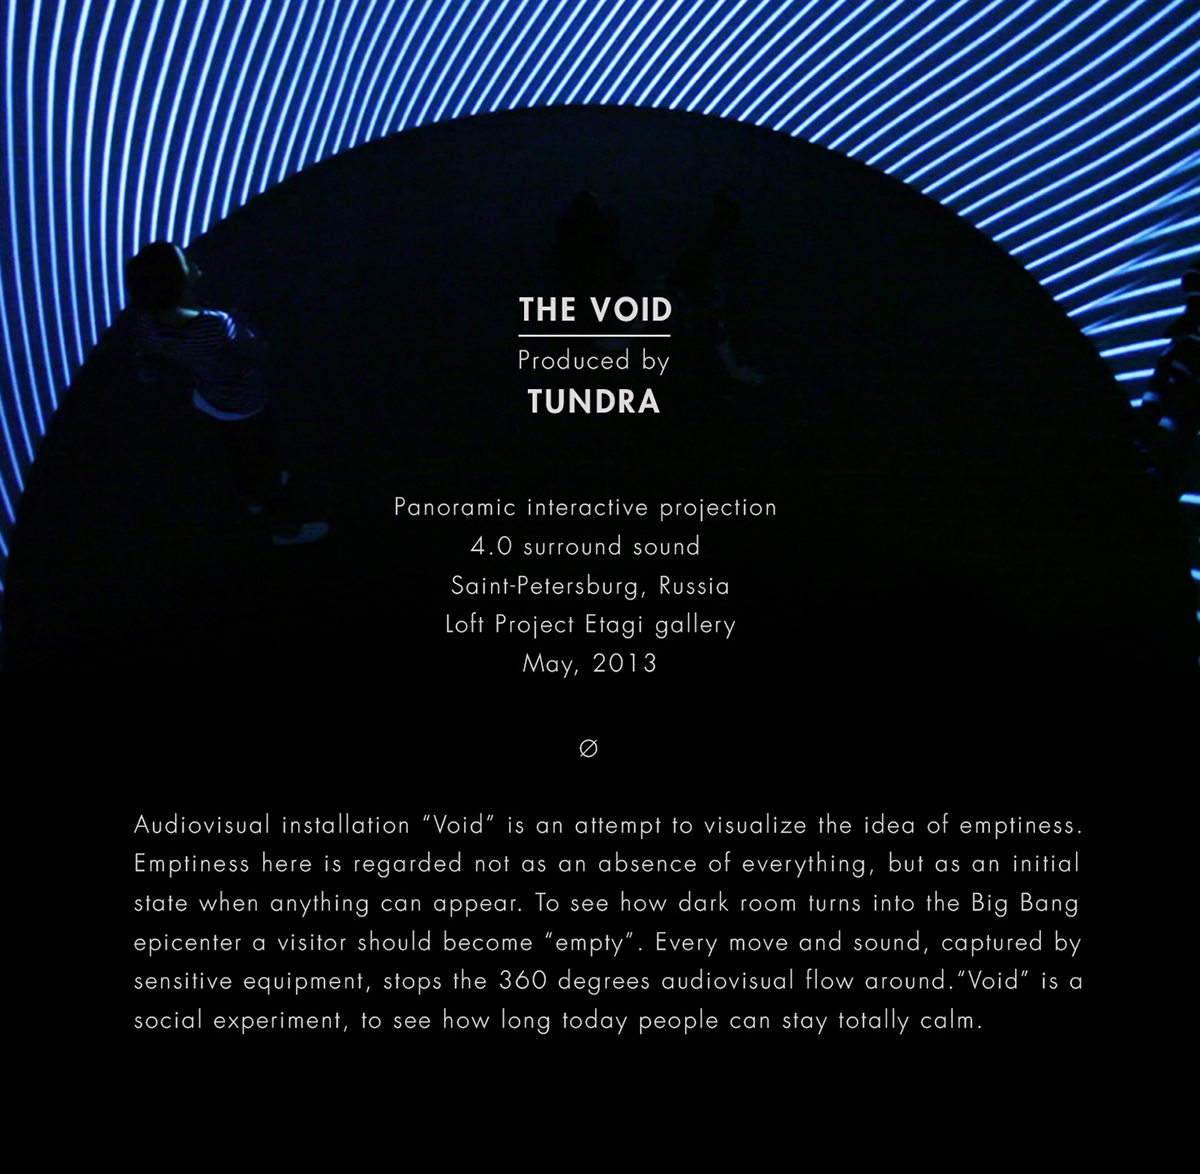 projection mapping mapping installation Mapping installation Audio Visual interactive projection sound Panoramic interactive projection surround sound panoramic projection The Void Void 360 degrees Social Experiment